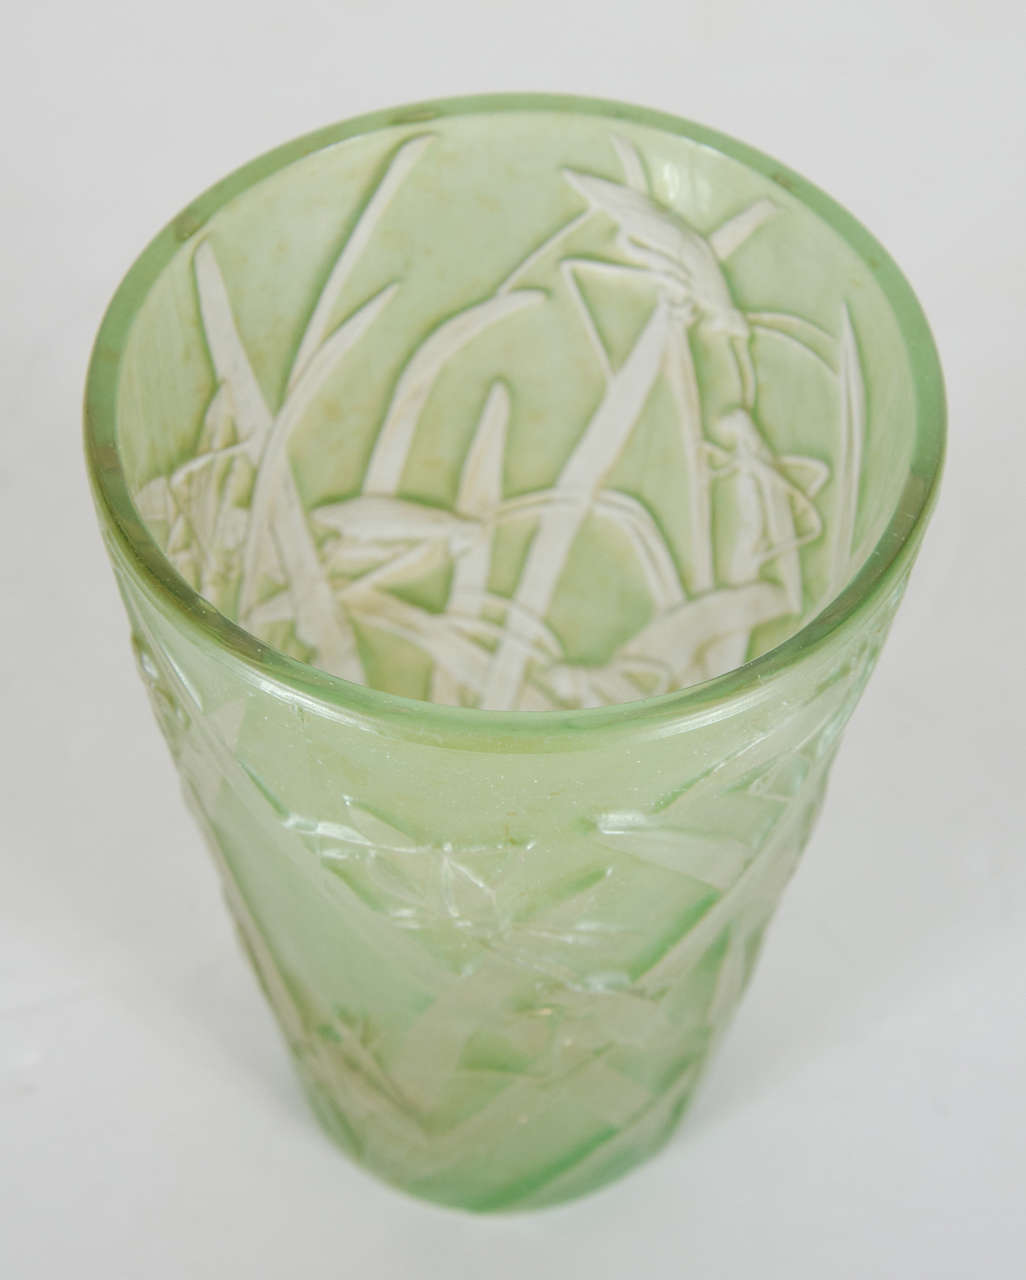 This gorgeous vase is decorated with green grasshopper ornamentation throughout with stylized floral designs.